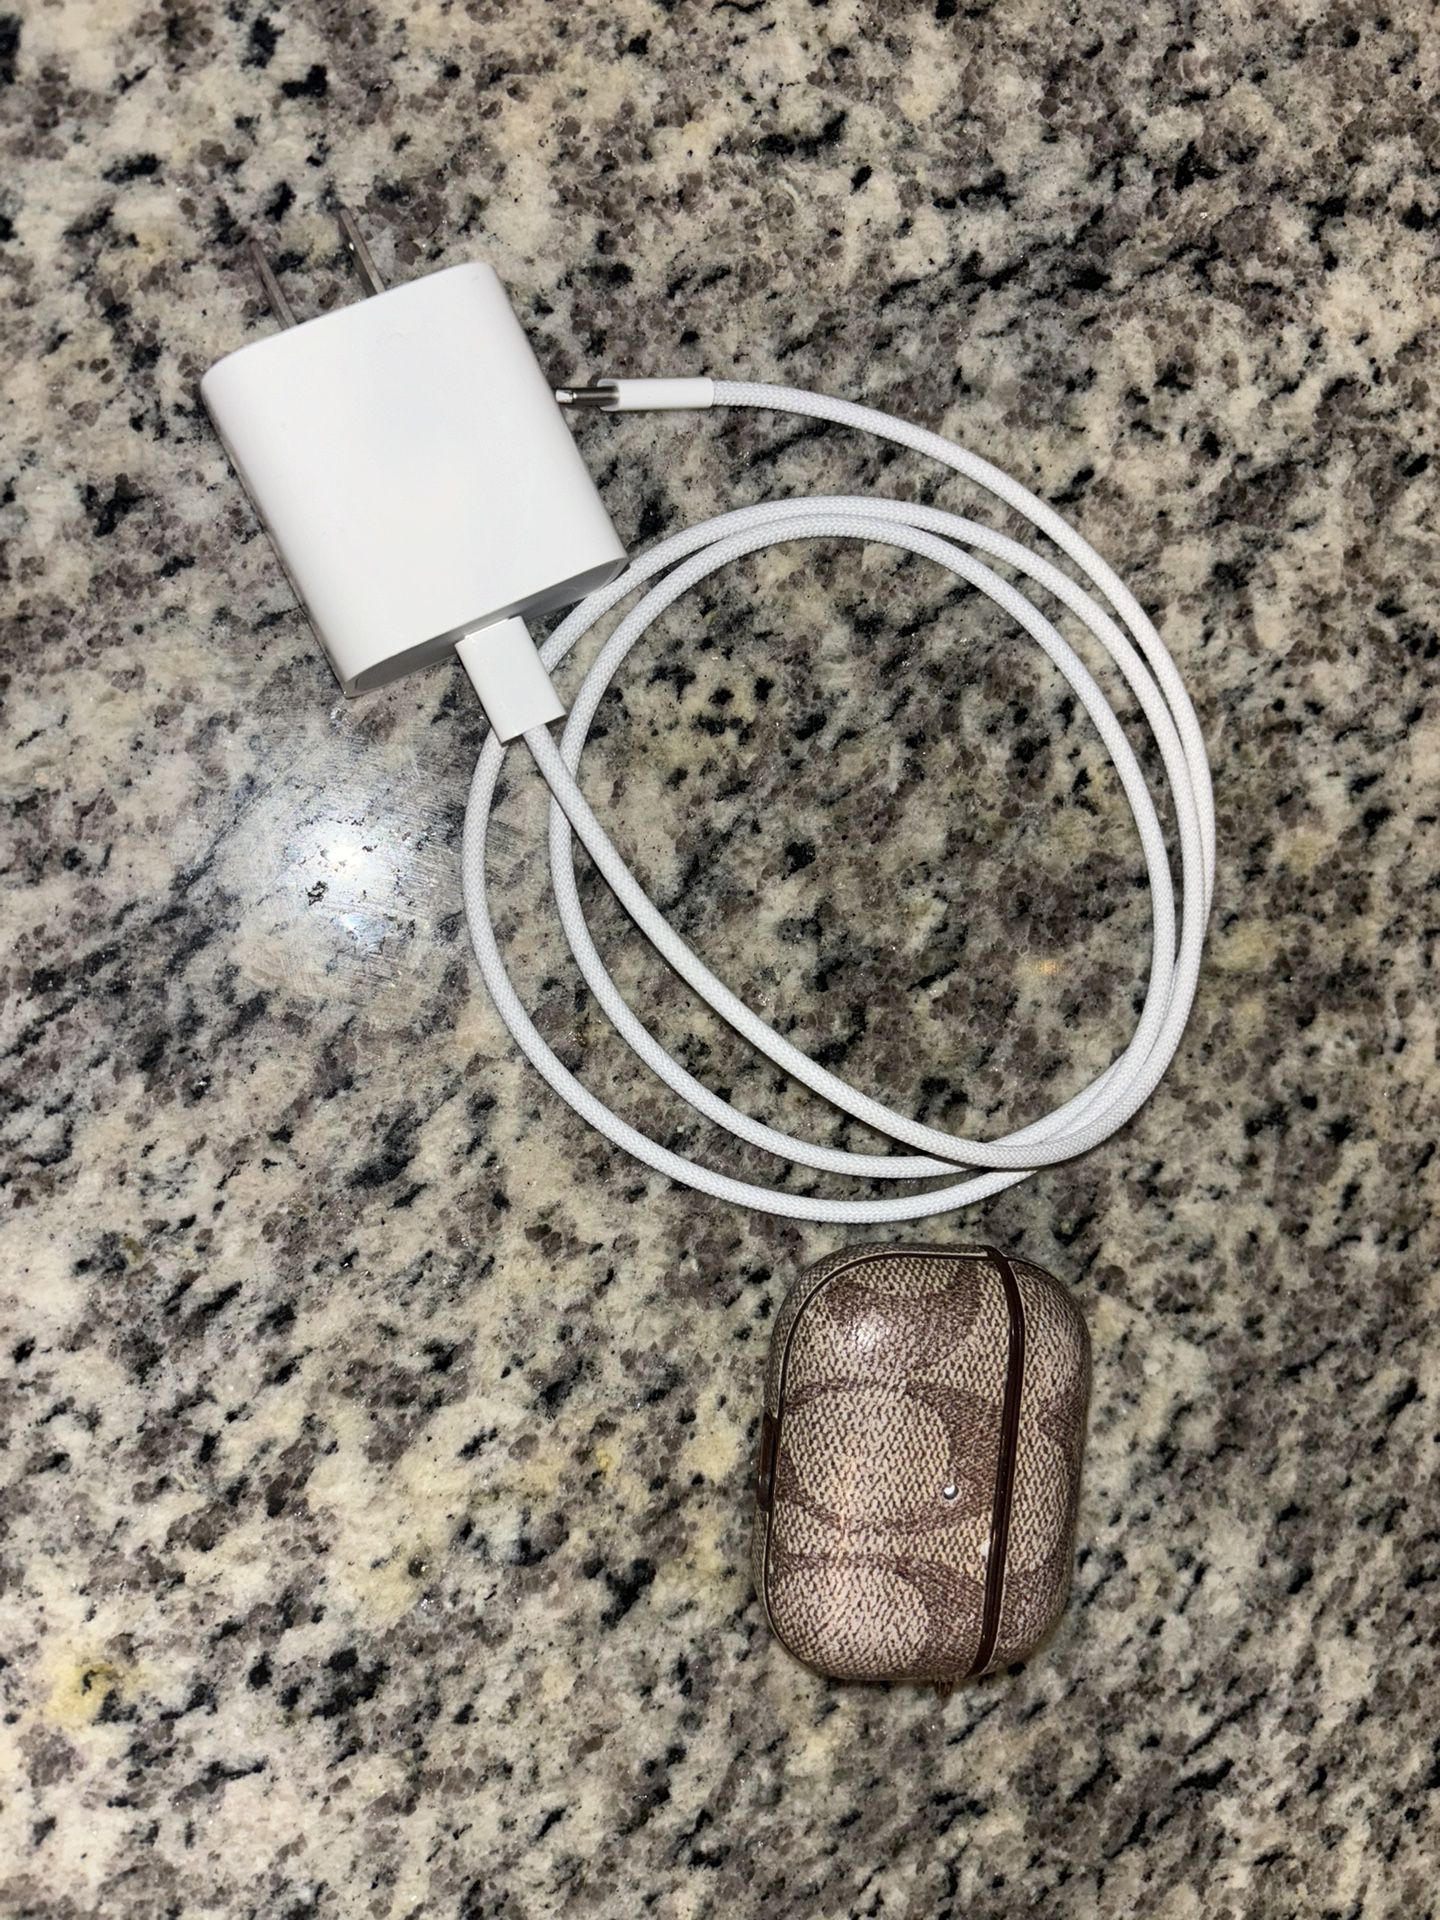 AirPod Pro 2nd Generation with Case and charging cable